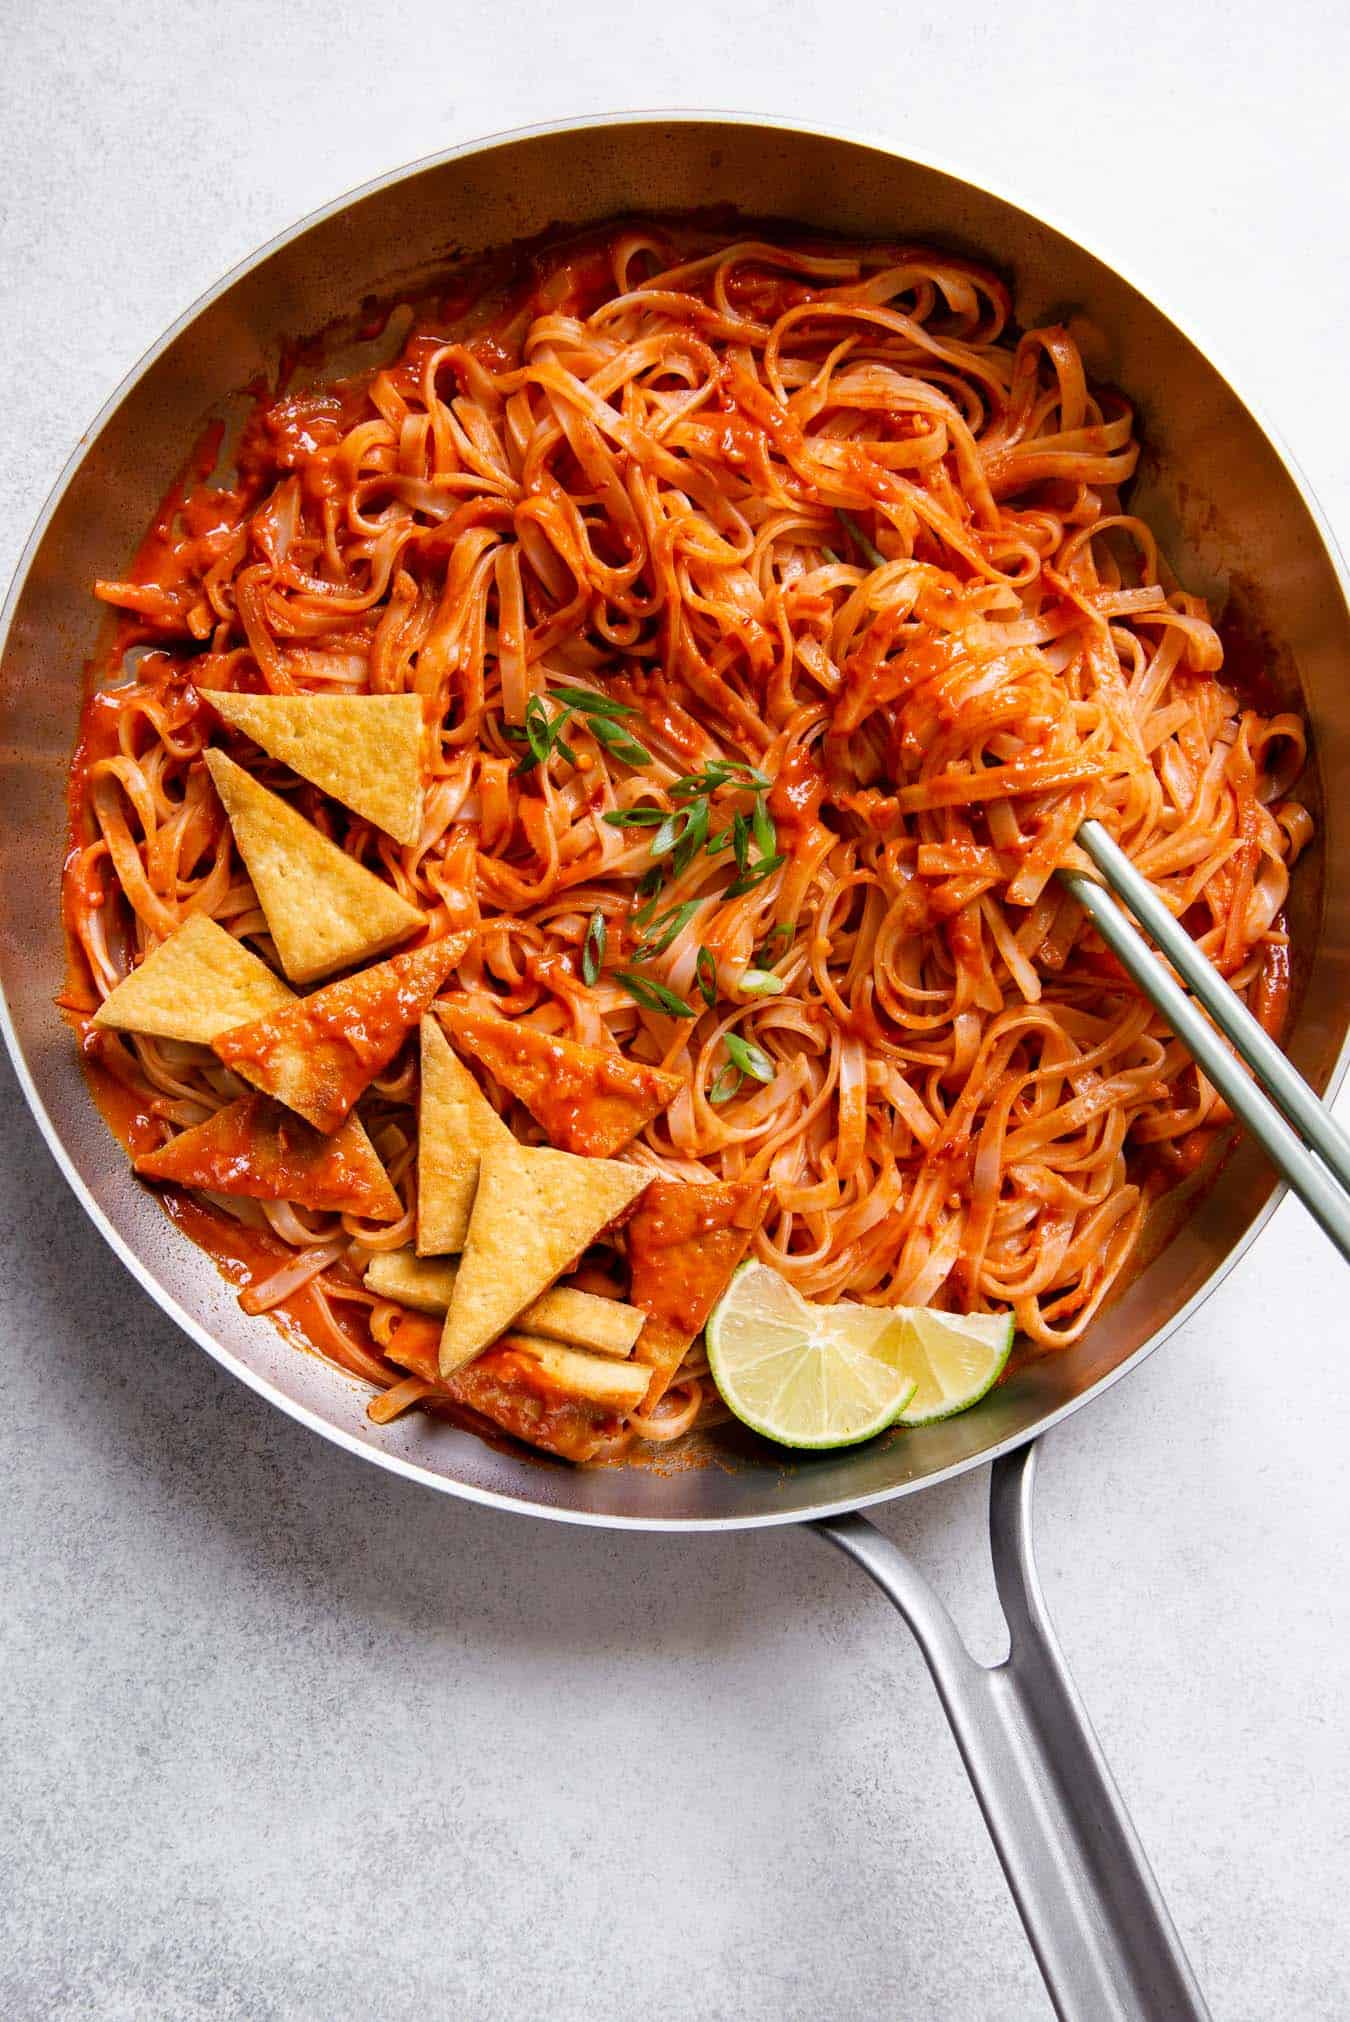 30-Minute Spicy Sambal Noodles Recipe with Pan-Fried Tofu